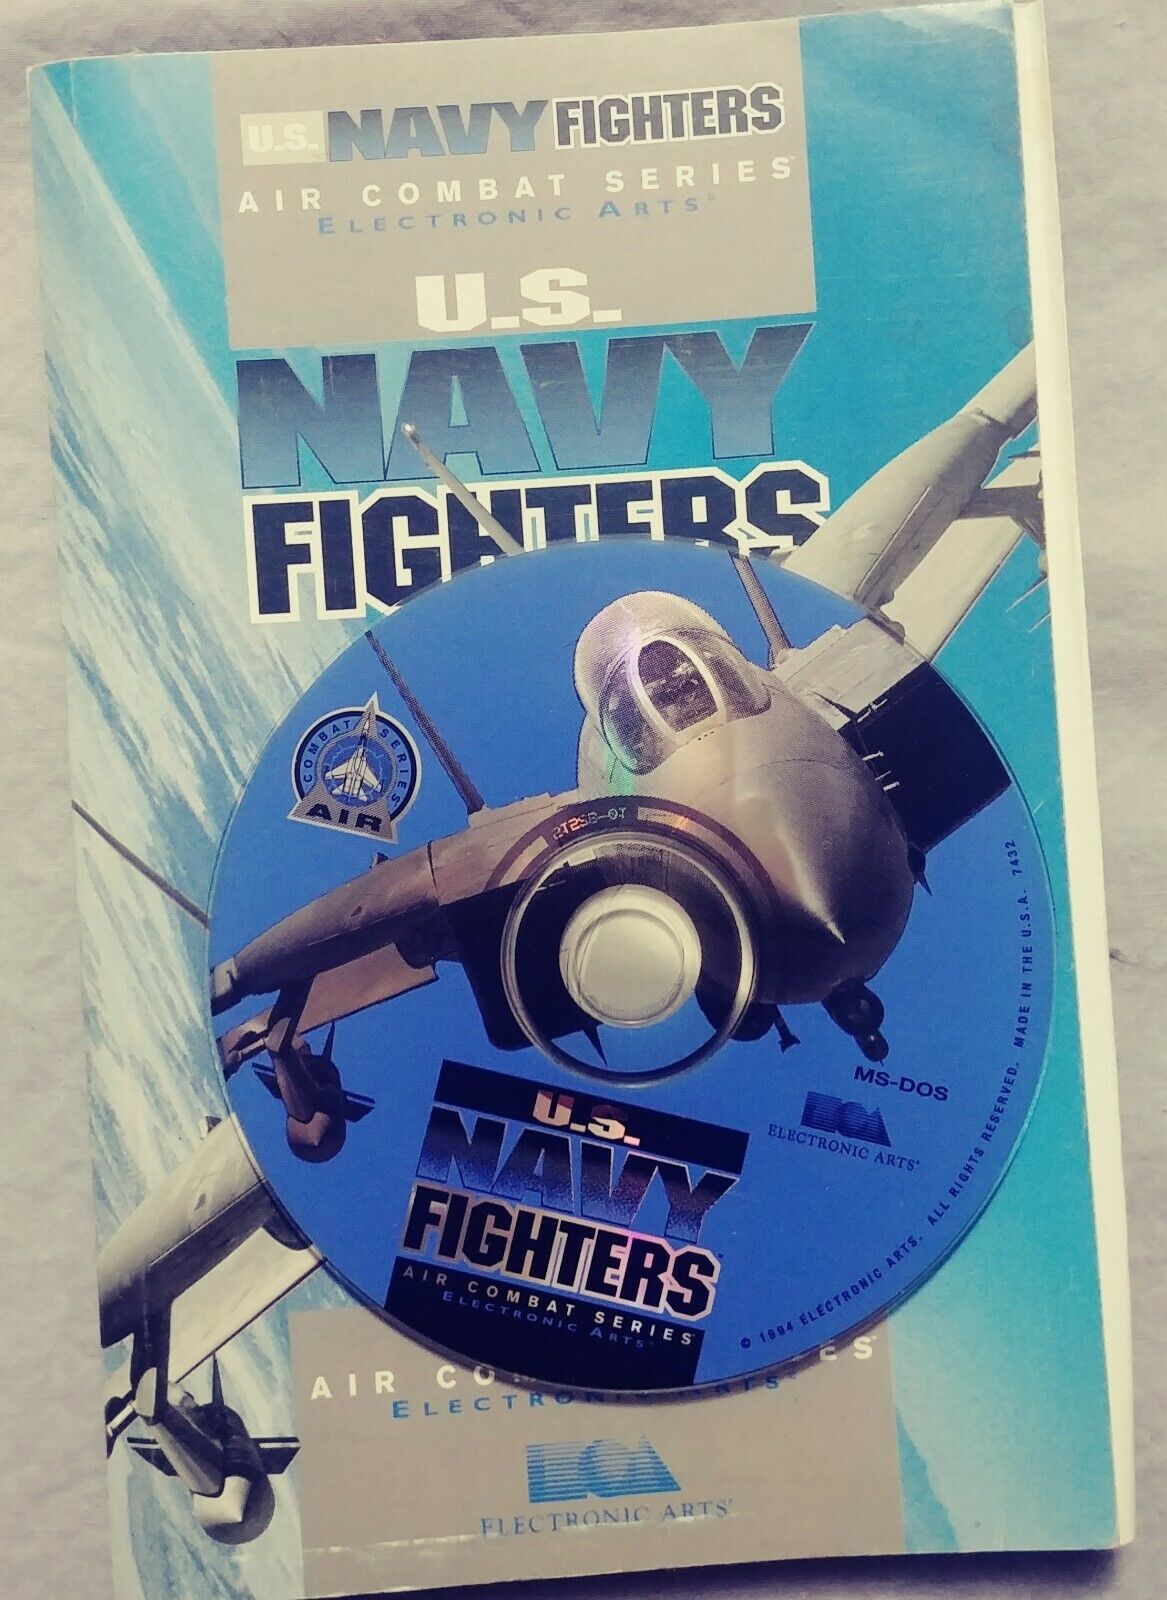 US Navy Fighters, Electronic Arts, Air Combat Series, 1994, with install guide